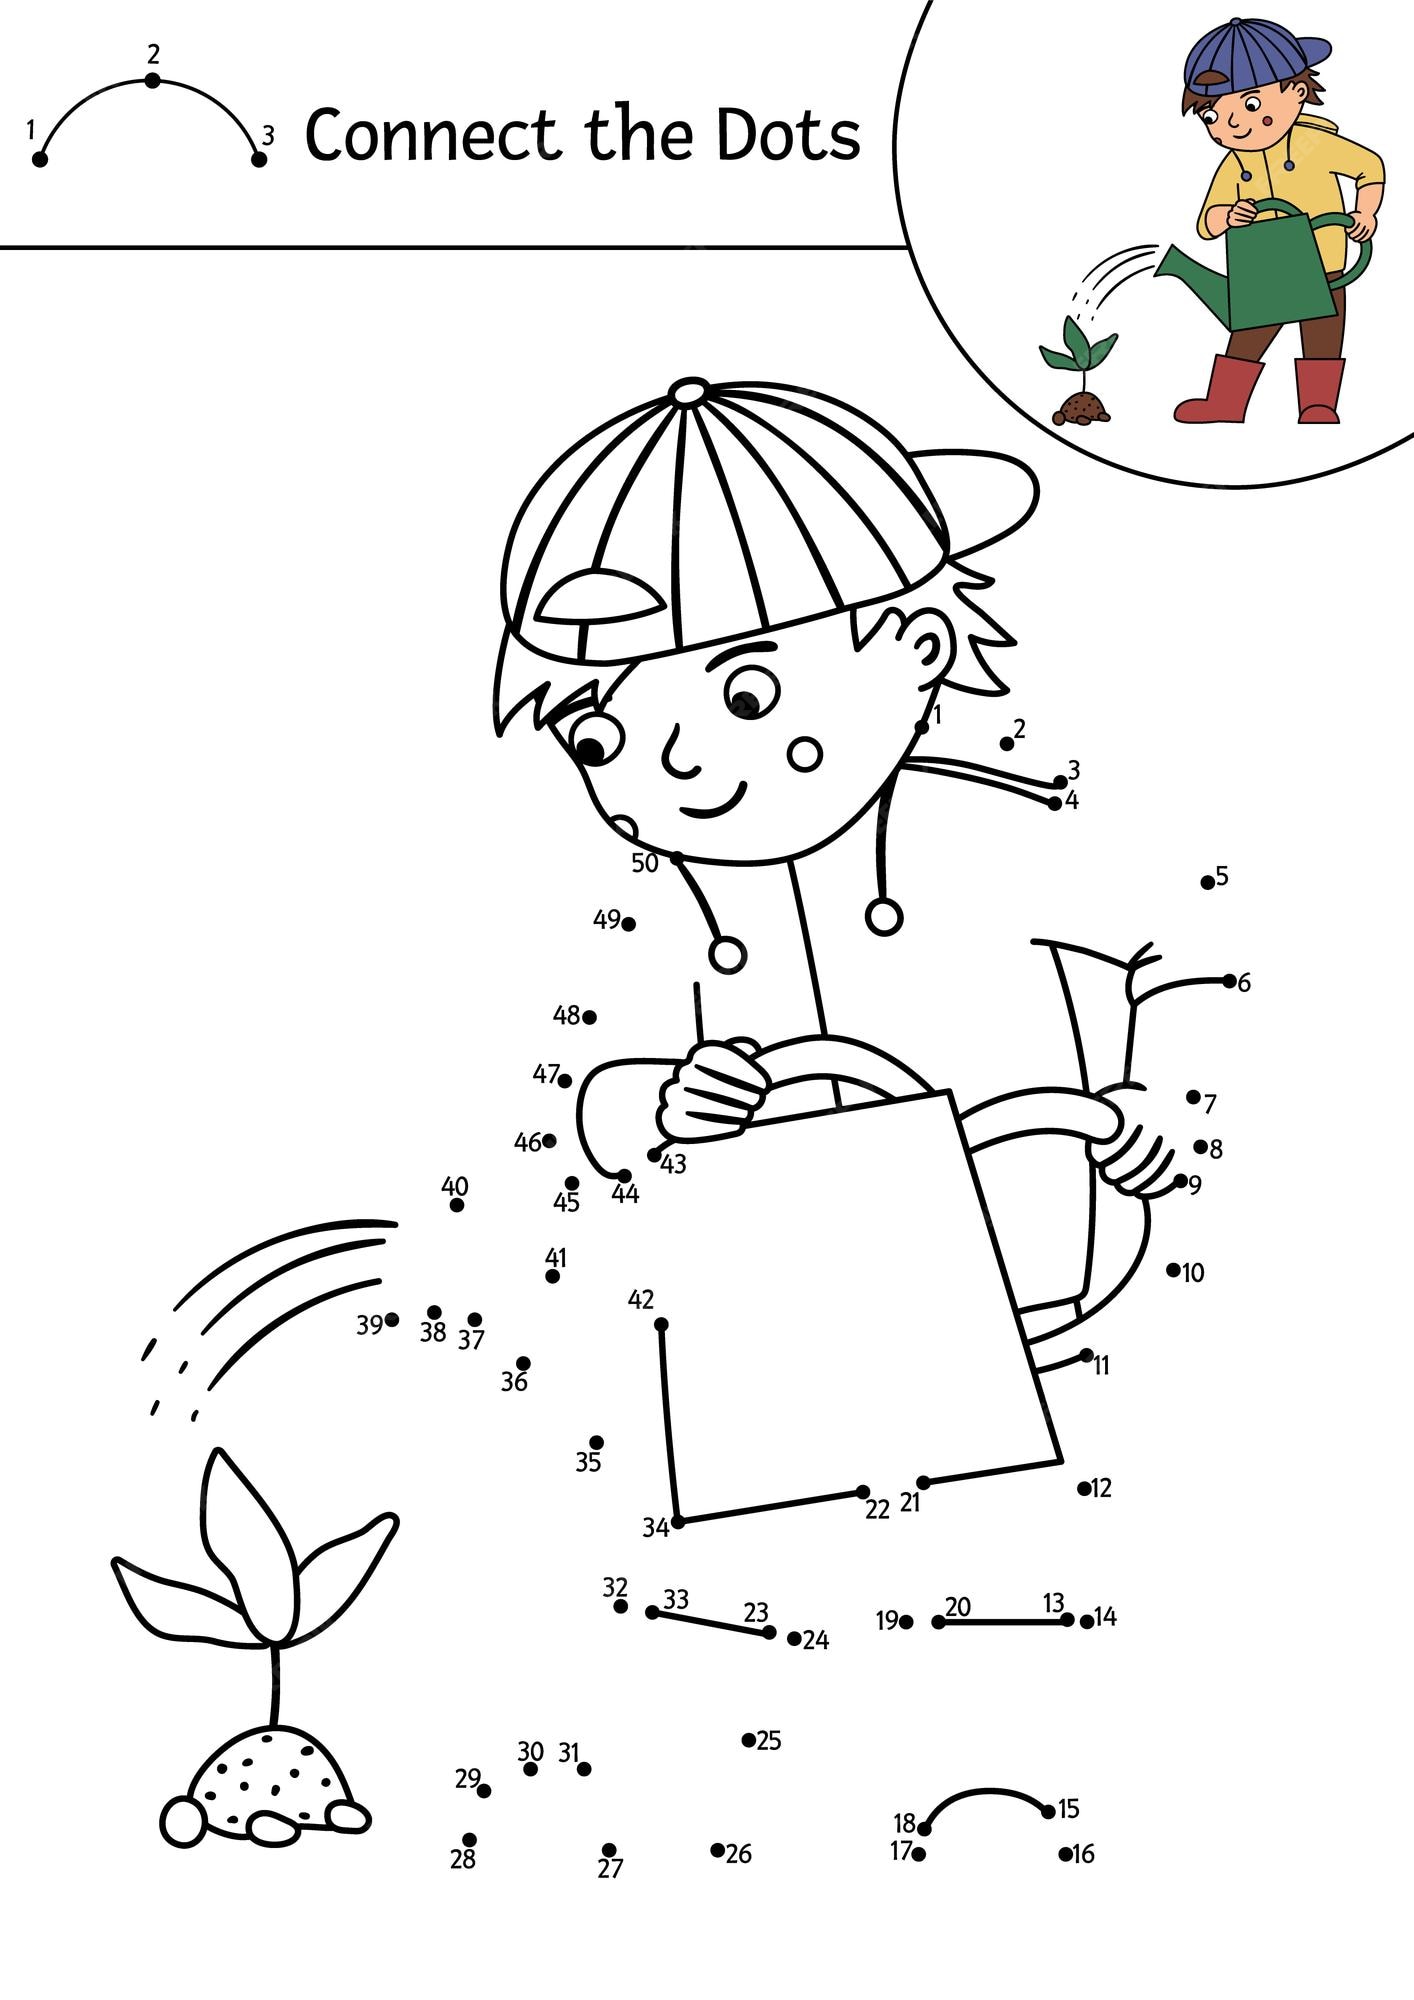 Premium vector vector dottodot and color activity with cute boy watering baby plant spring or summer connect the dots game for children garden themed printable worksheet or coloring page for kidsxa